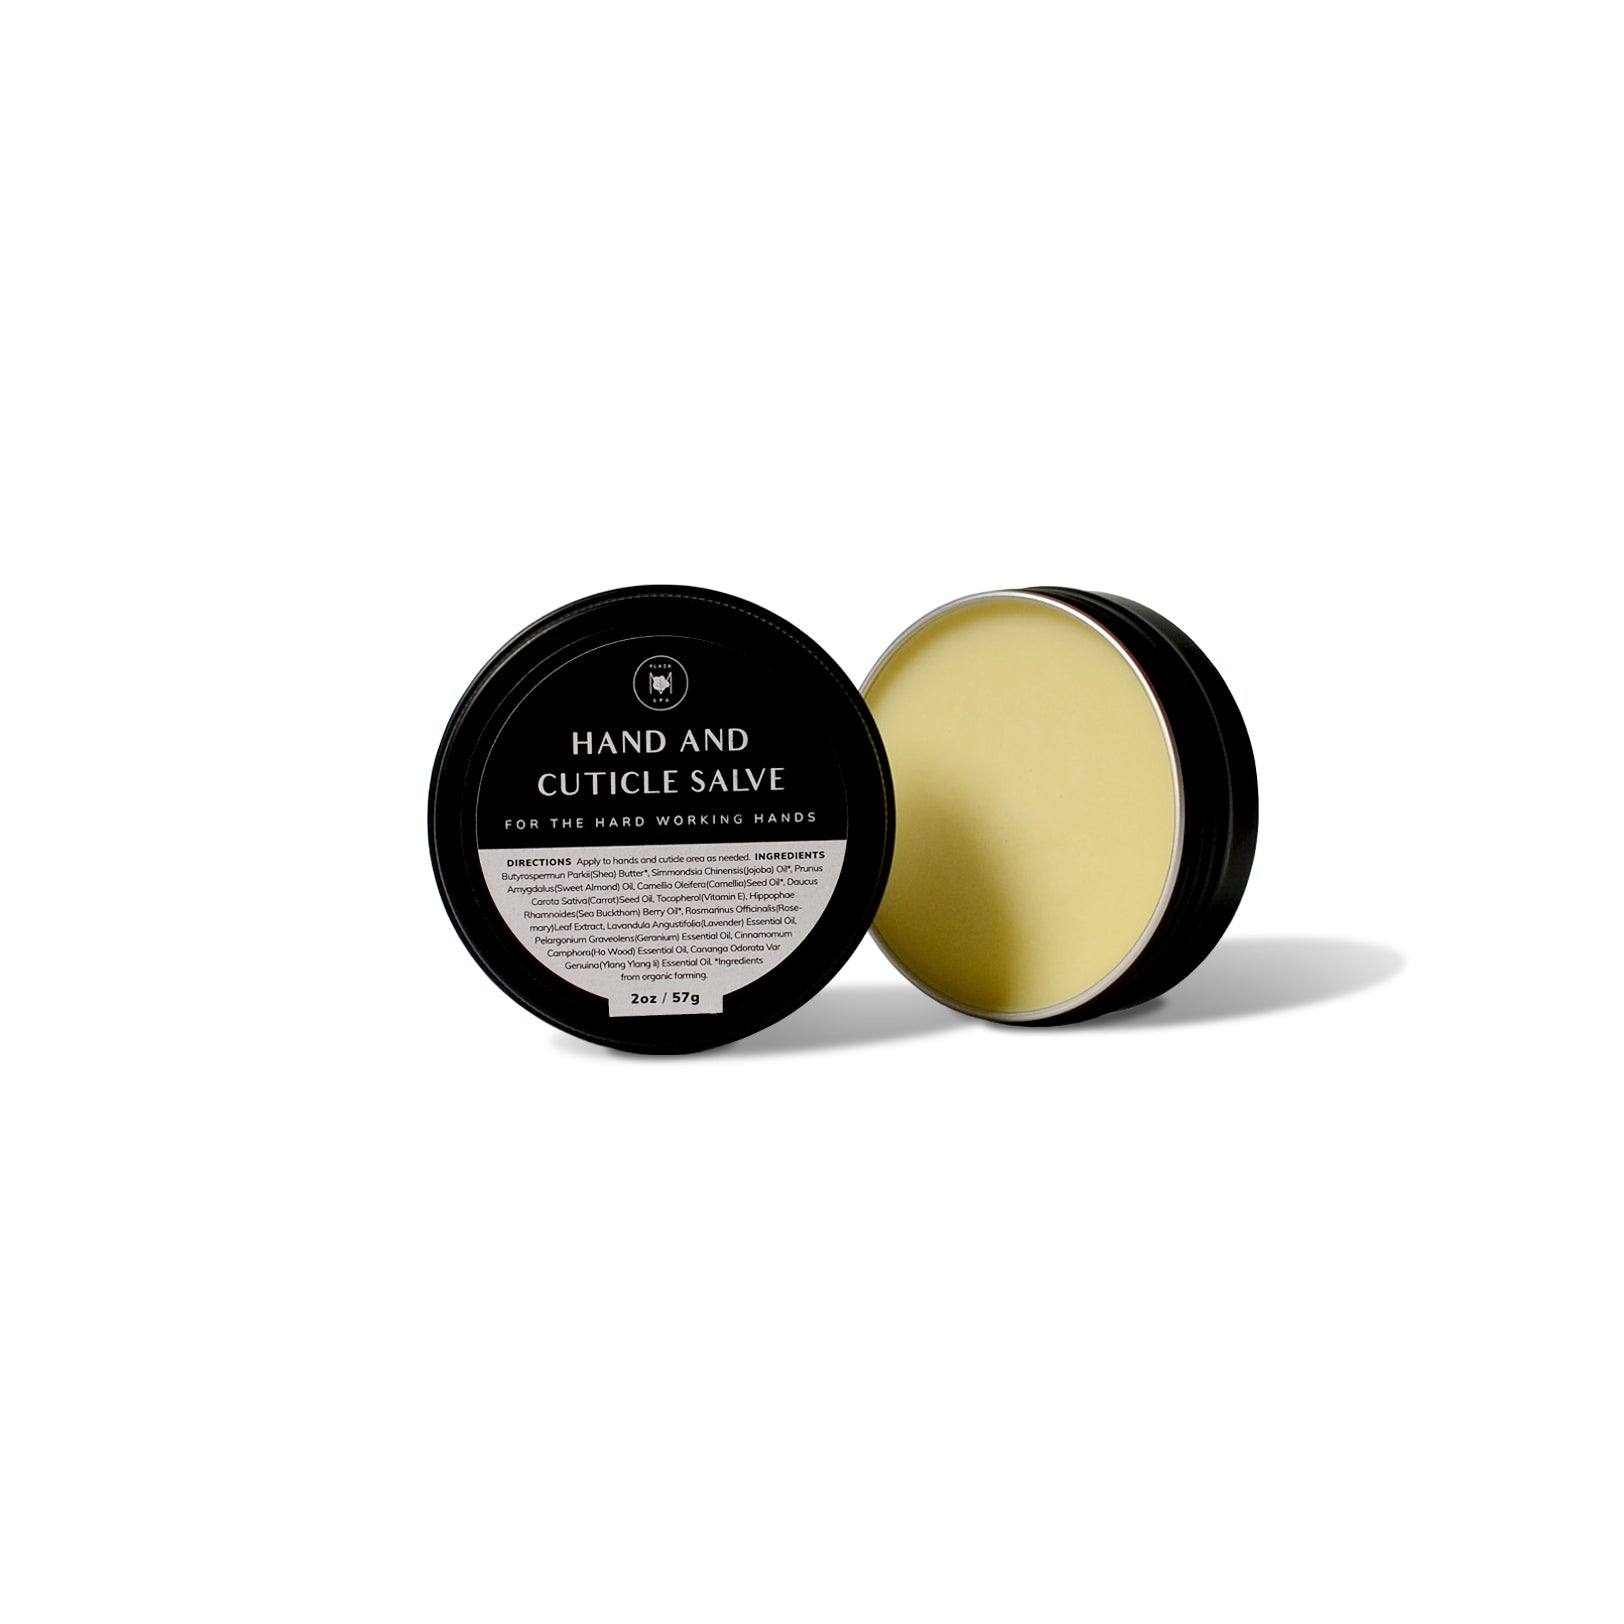 Hand and Cuticle Salve